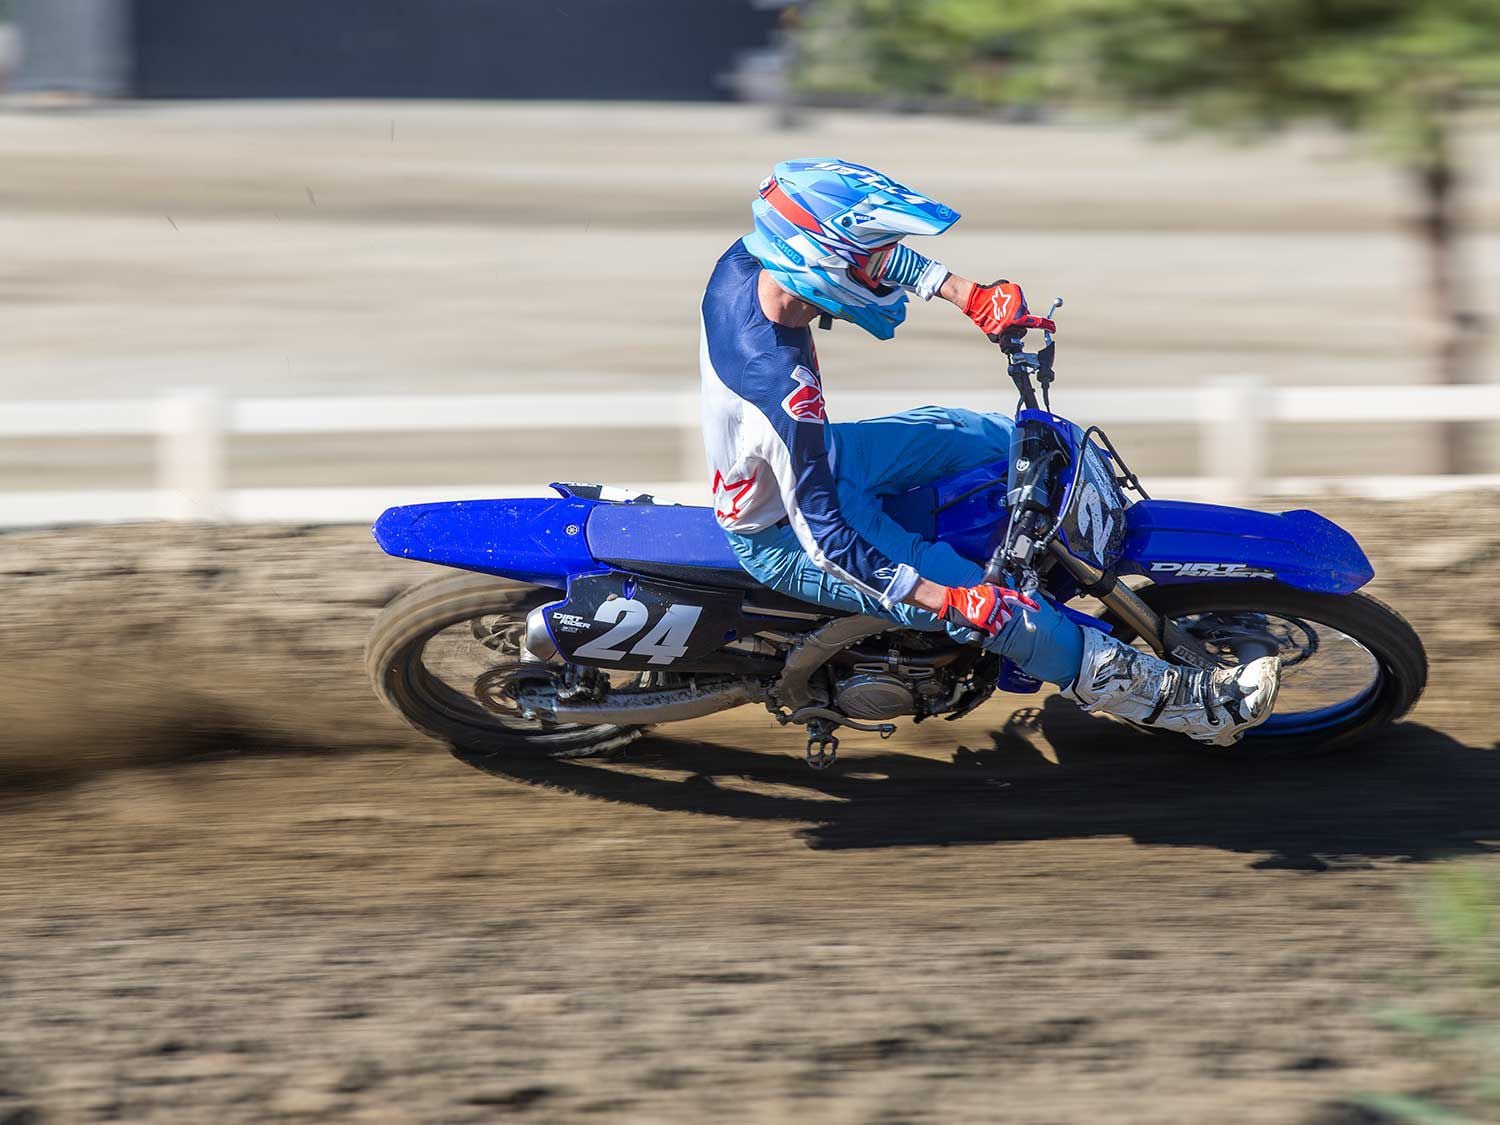 “The few downsides of the YZ250F are that it is not the most agile bike and its bulky feel makes it a little difficult to lean and carve corners.” <em>—Michael Wicker</em>